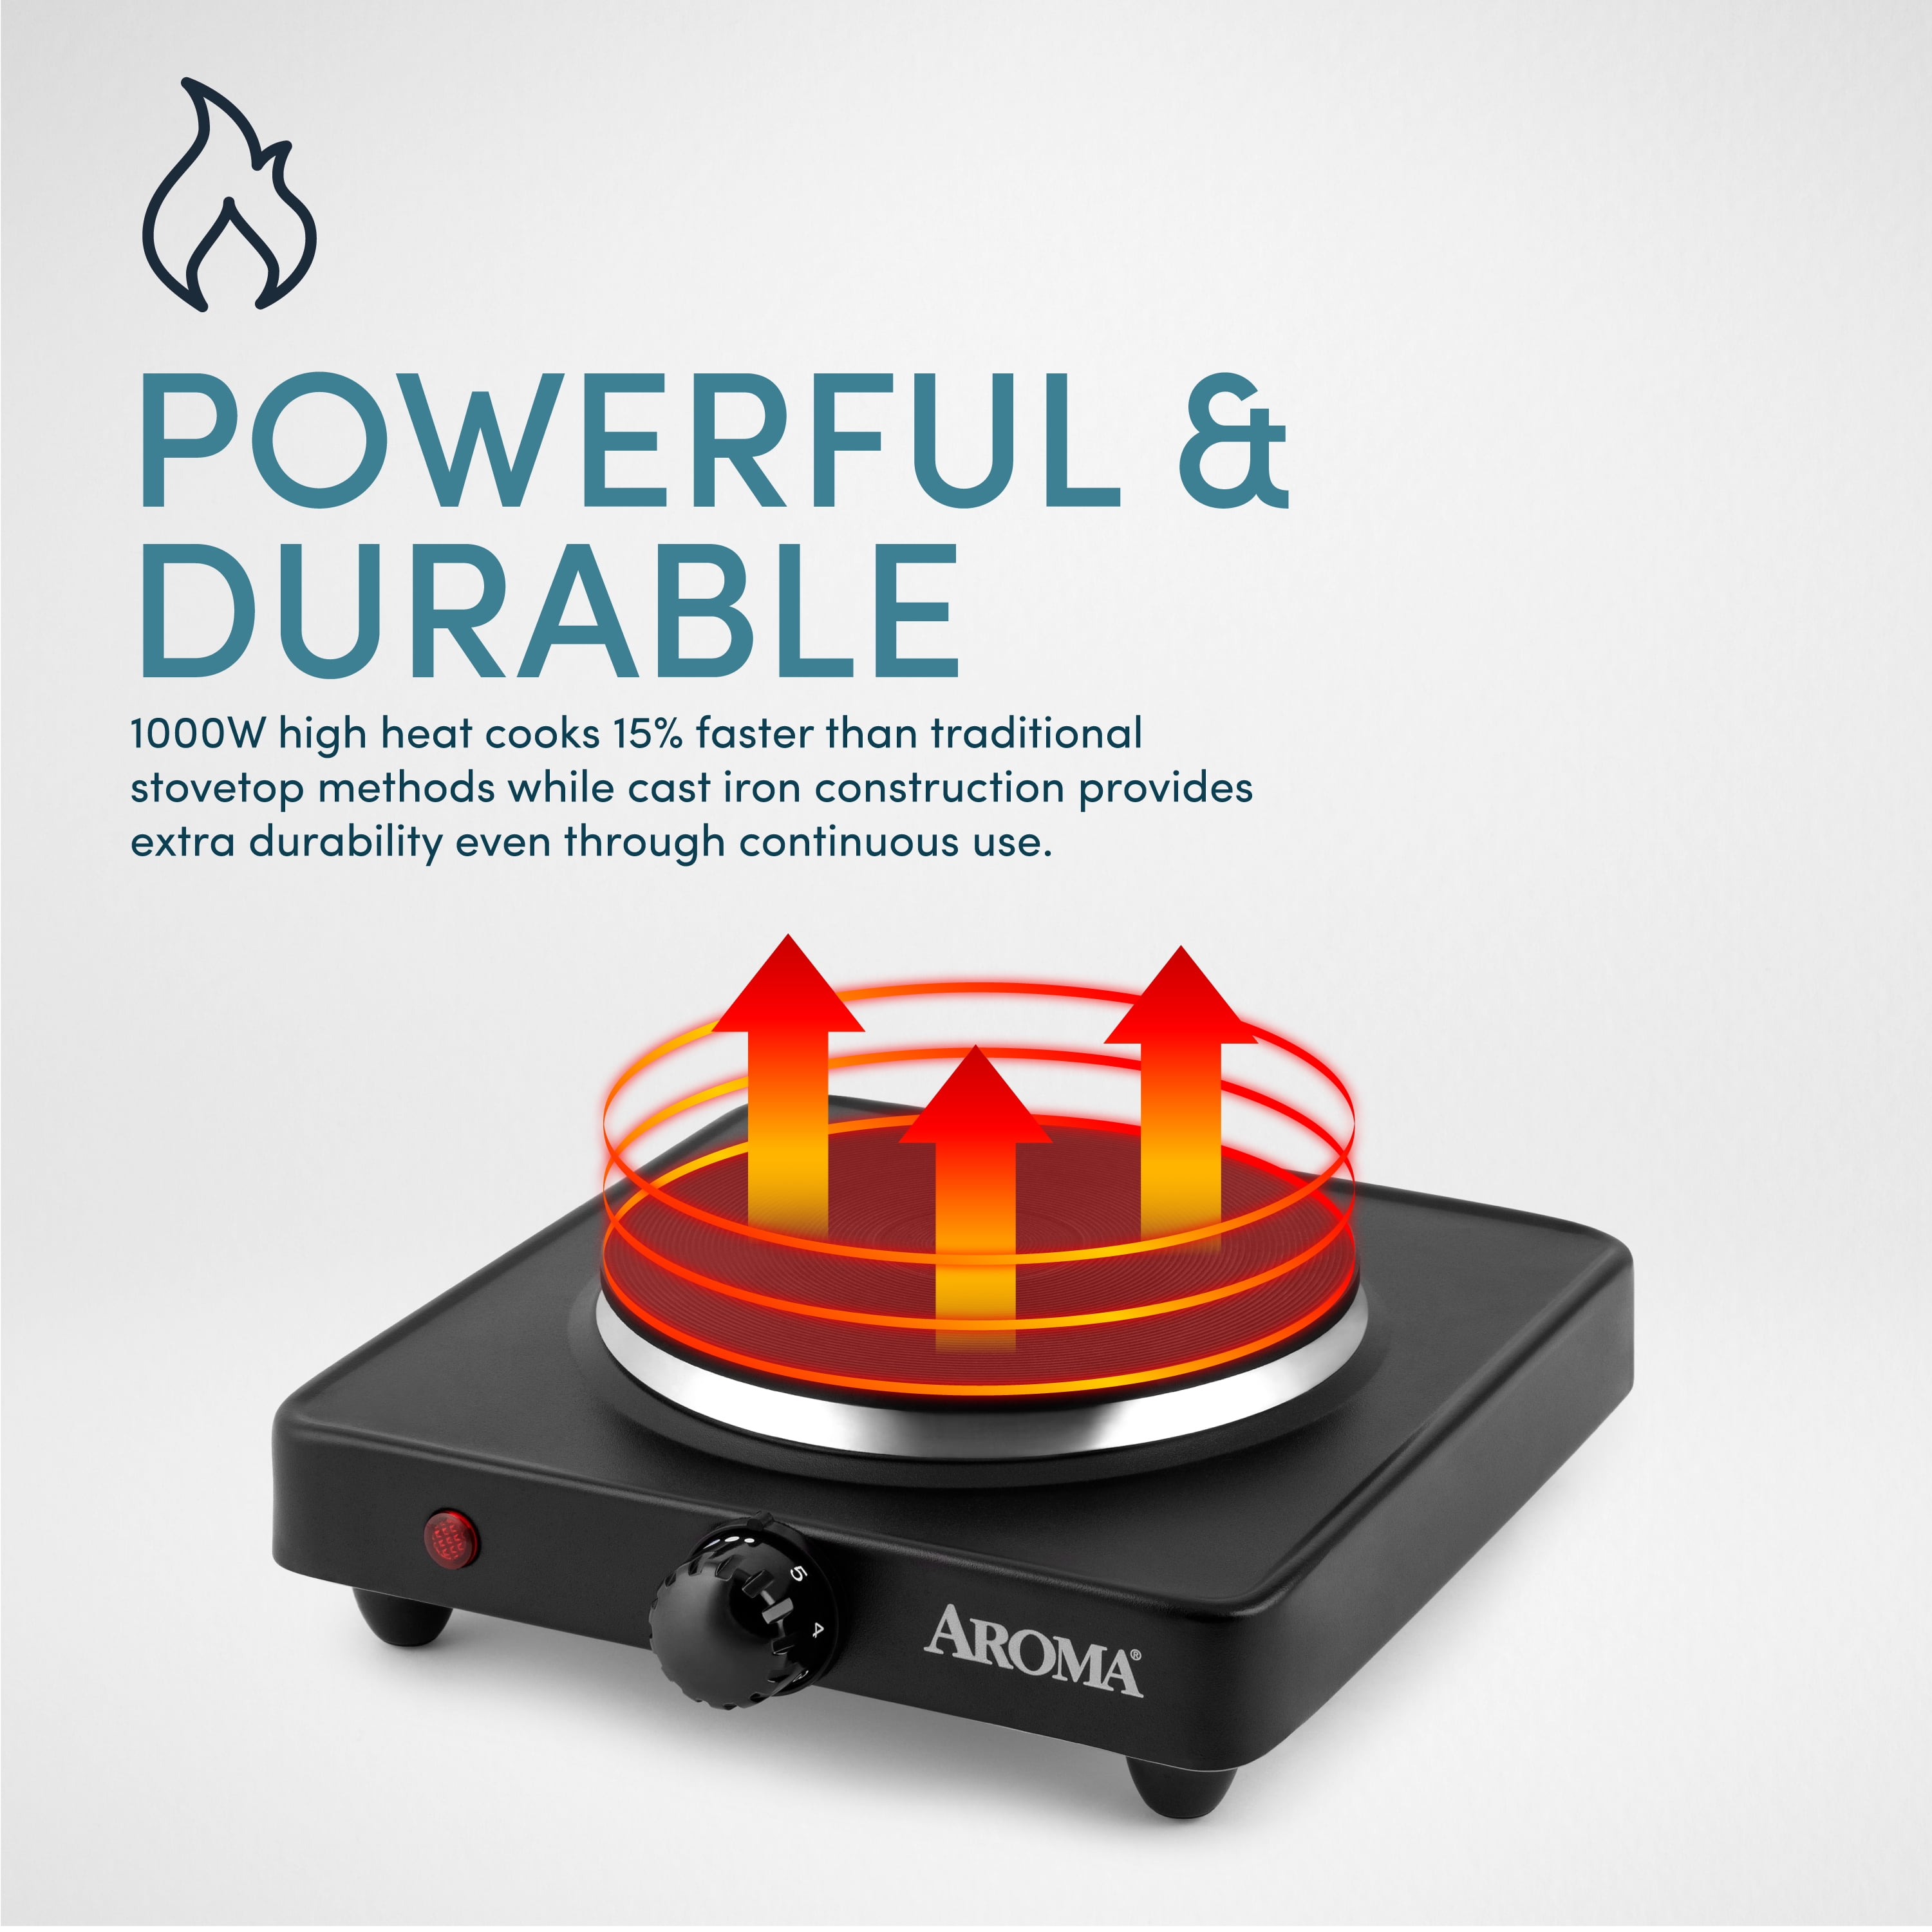 Generic ANHANE 1800W Electric Hot Plate Single Burner,Portable Electric  Stove for Cooking,Infrared Burner,4-Hour Setting,Black Crystal